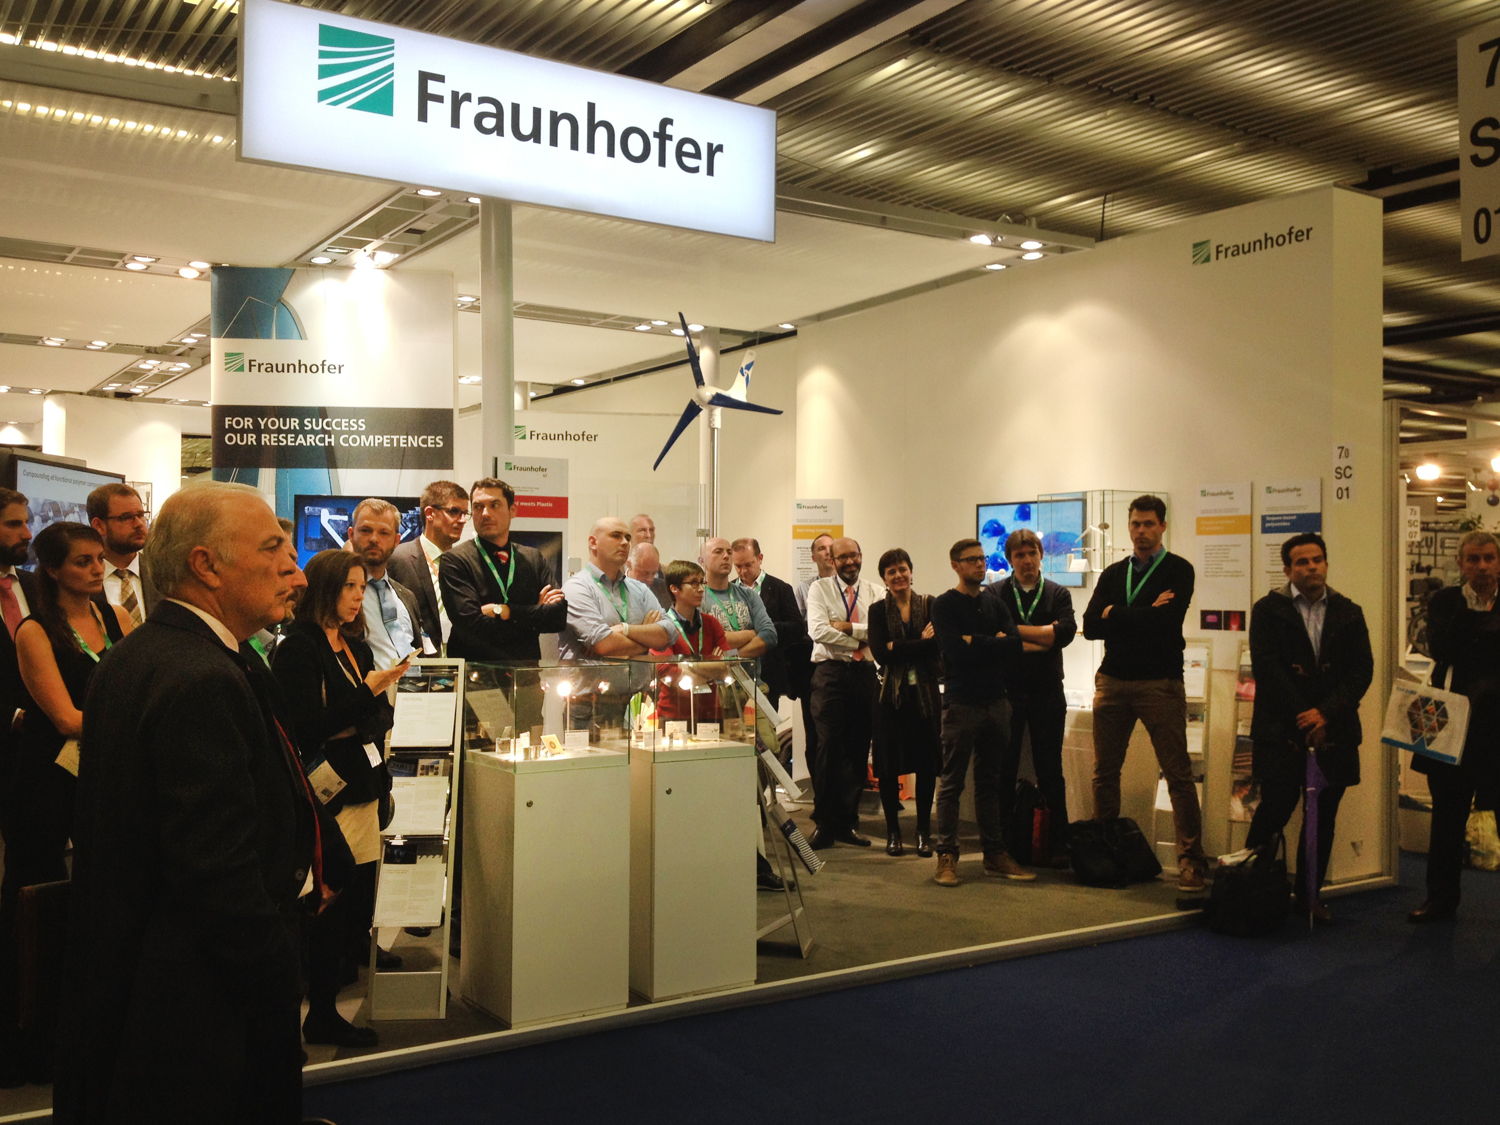 Fraunhofer Institute hosted the event which was followed by a cocktail party.